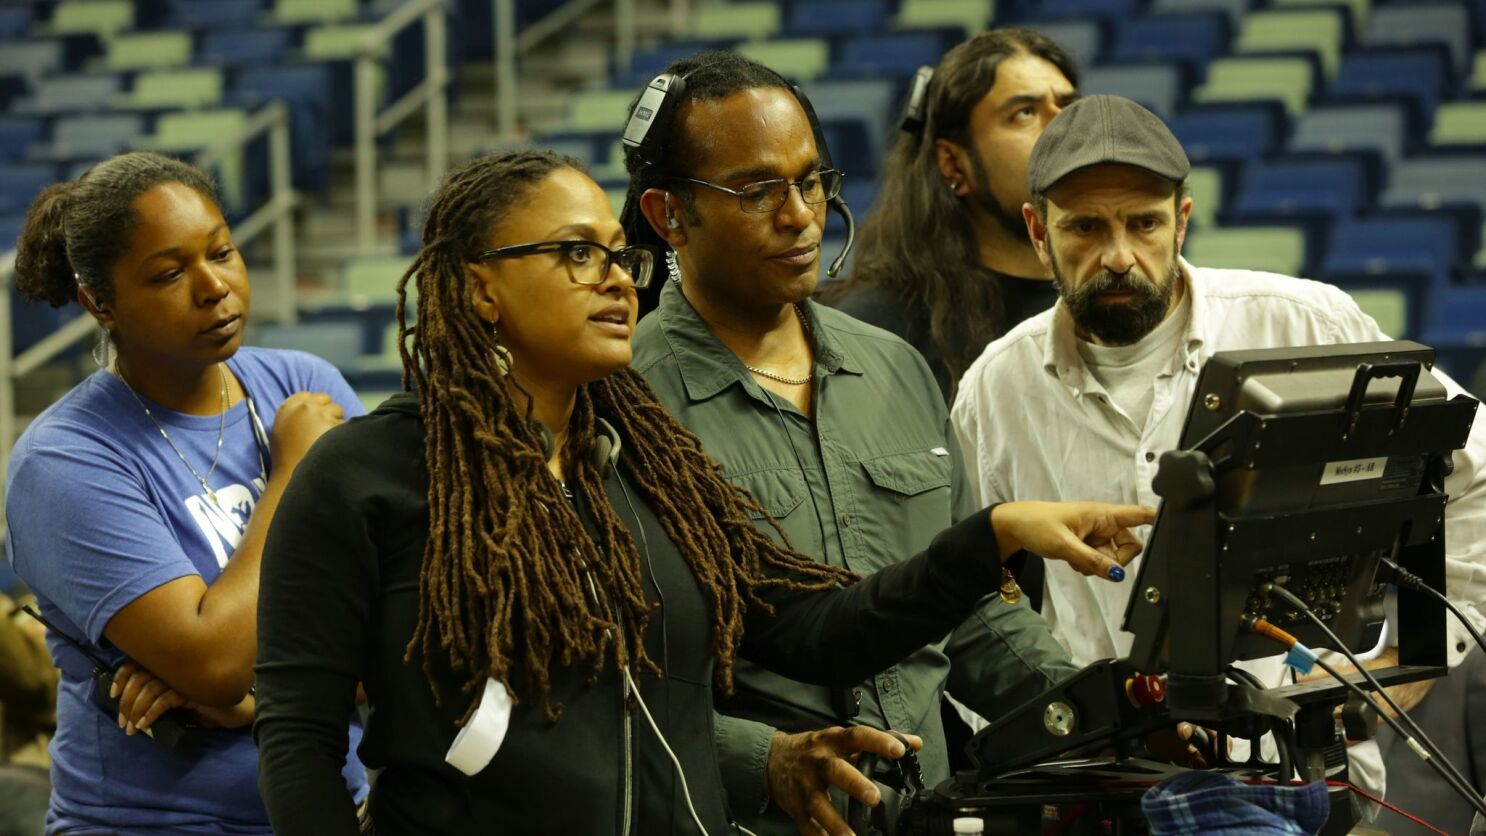 Ava DuVernay directing at tap on set